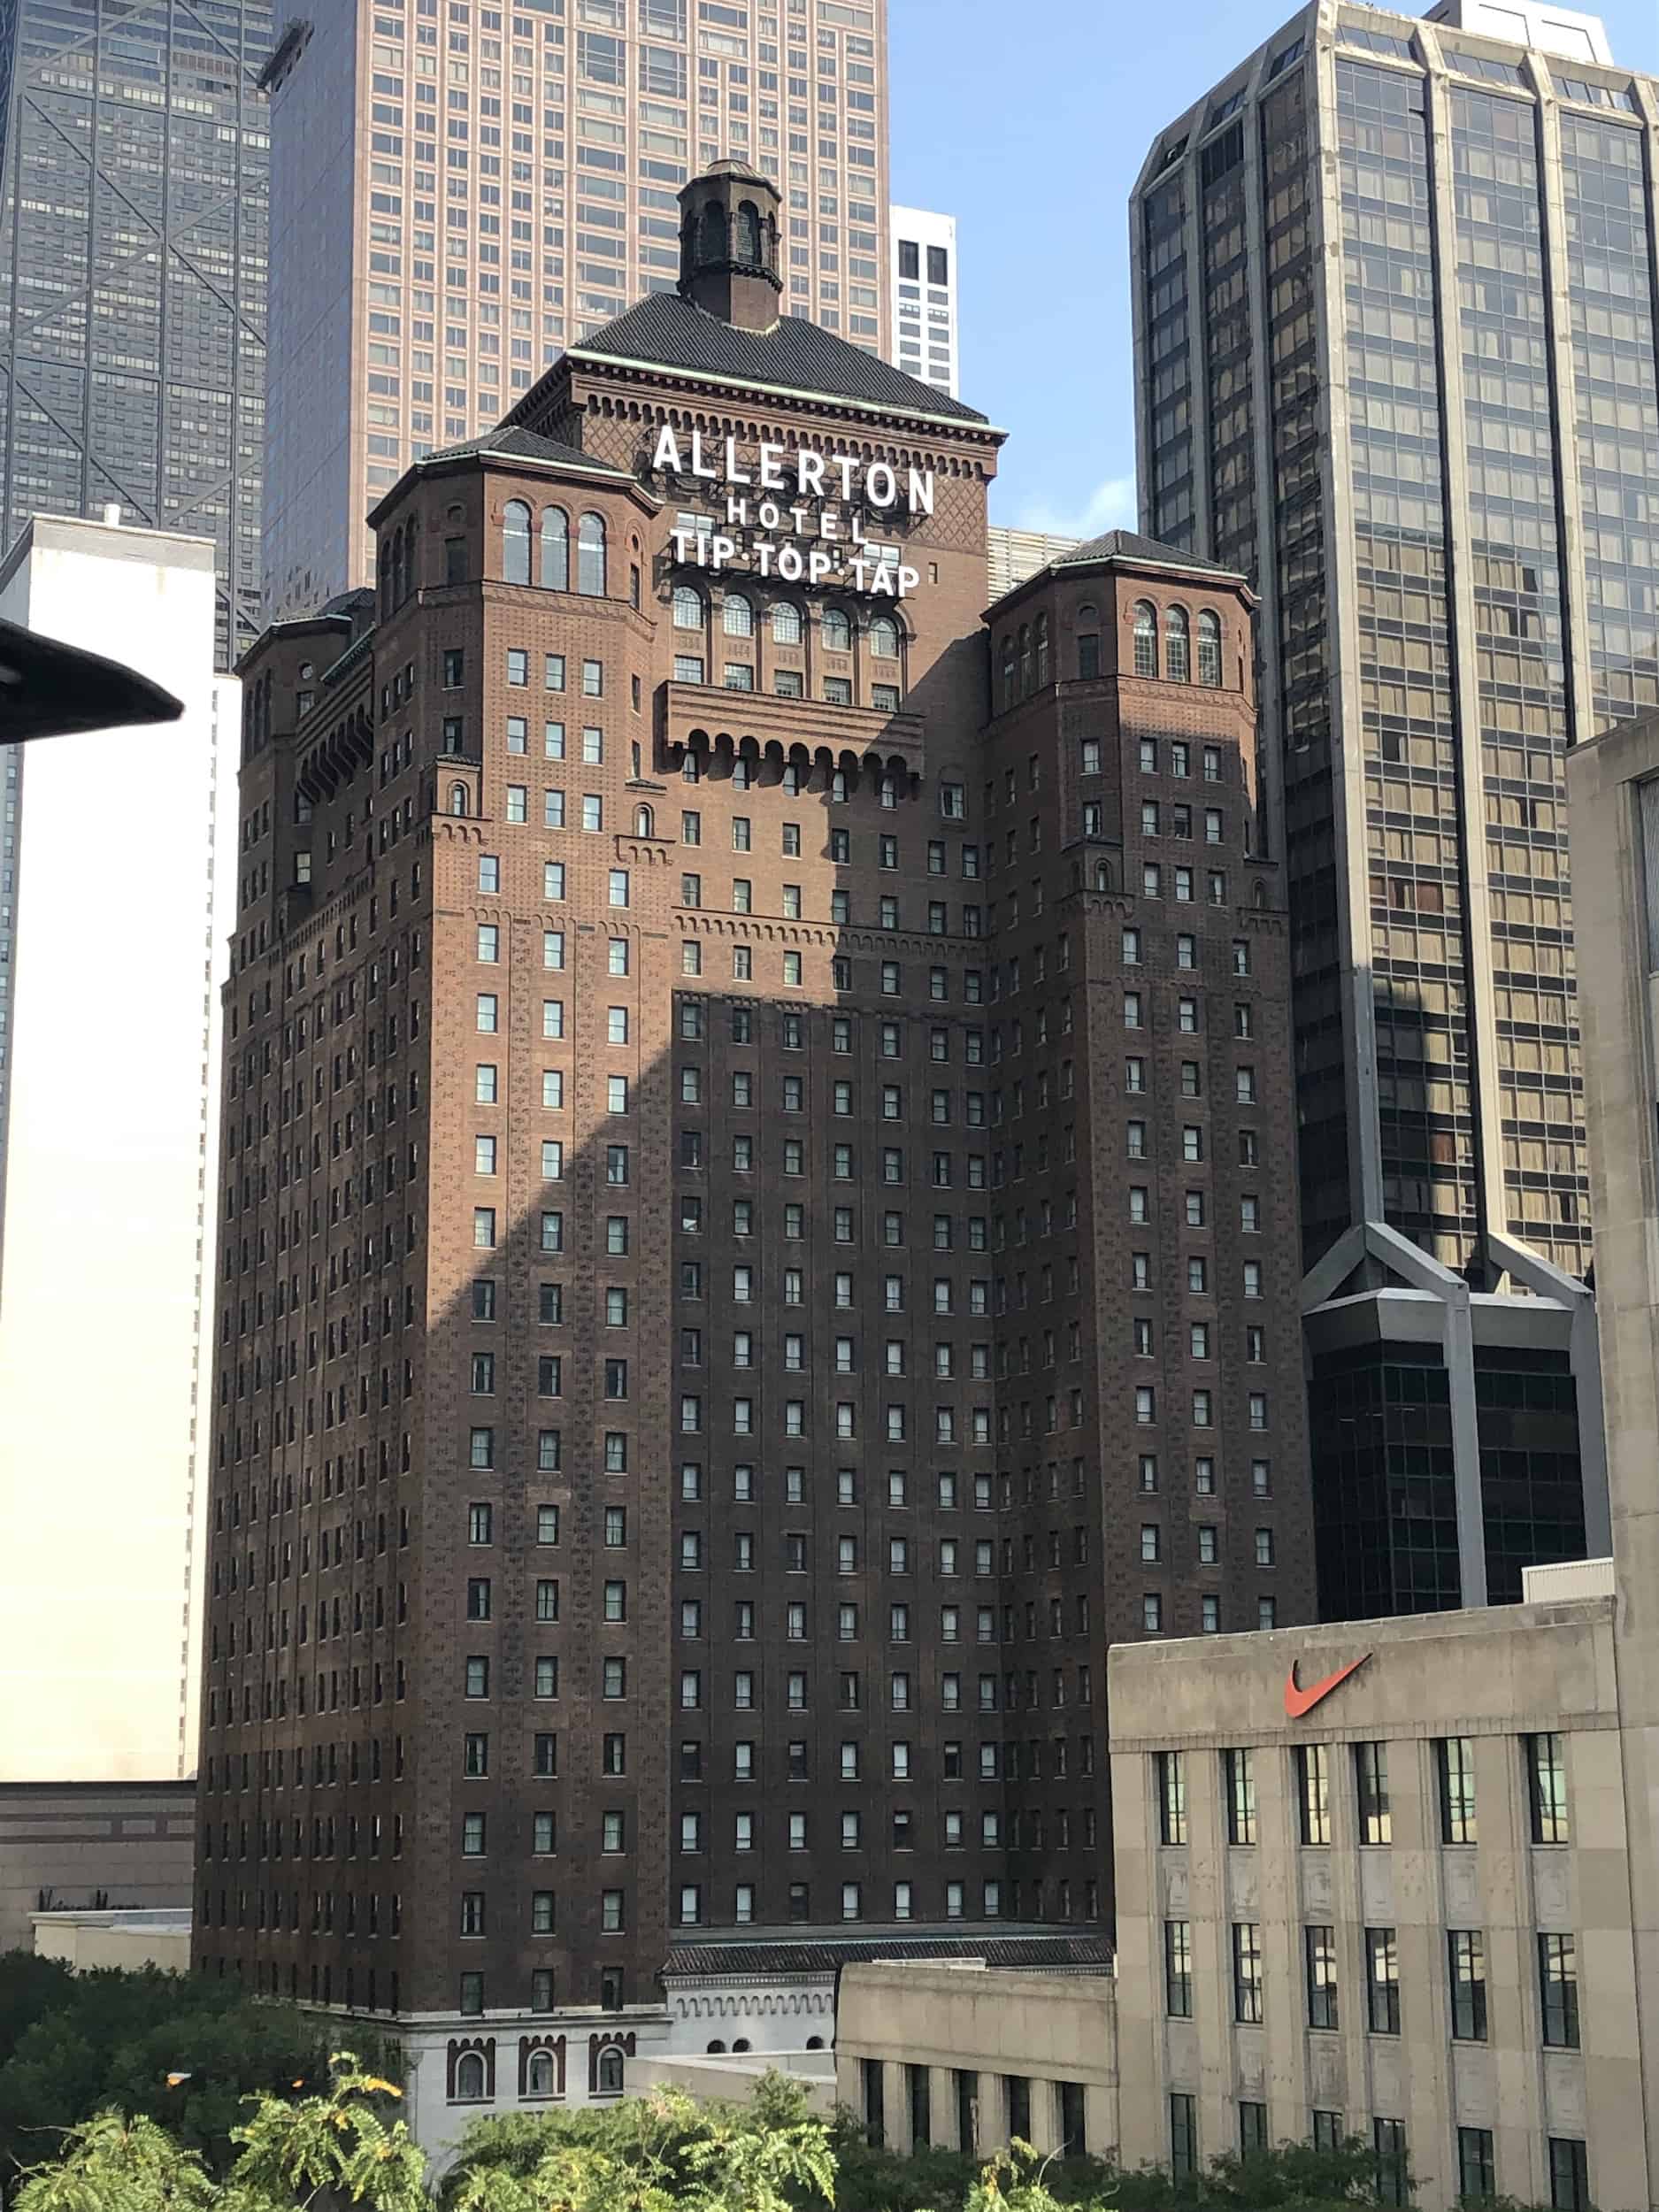 Allerton Hotel along the Magnificent Mile in Chicago, Illinois